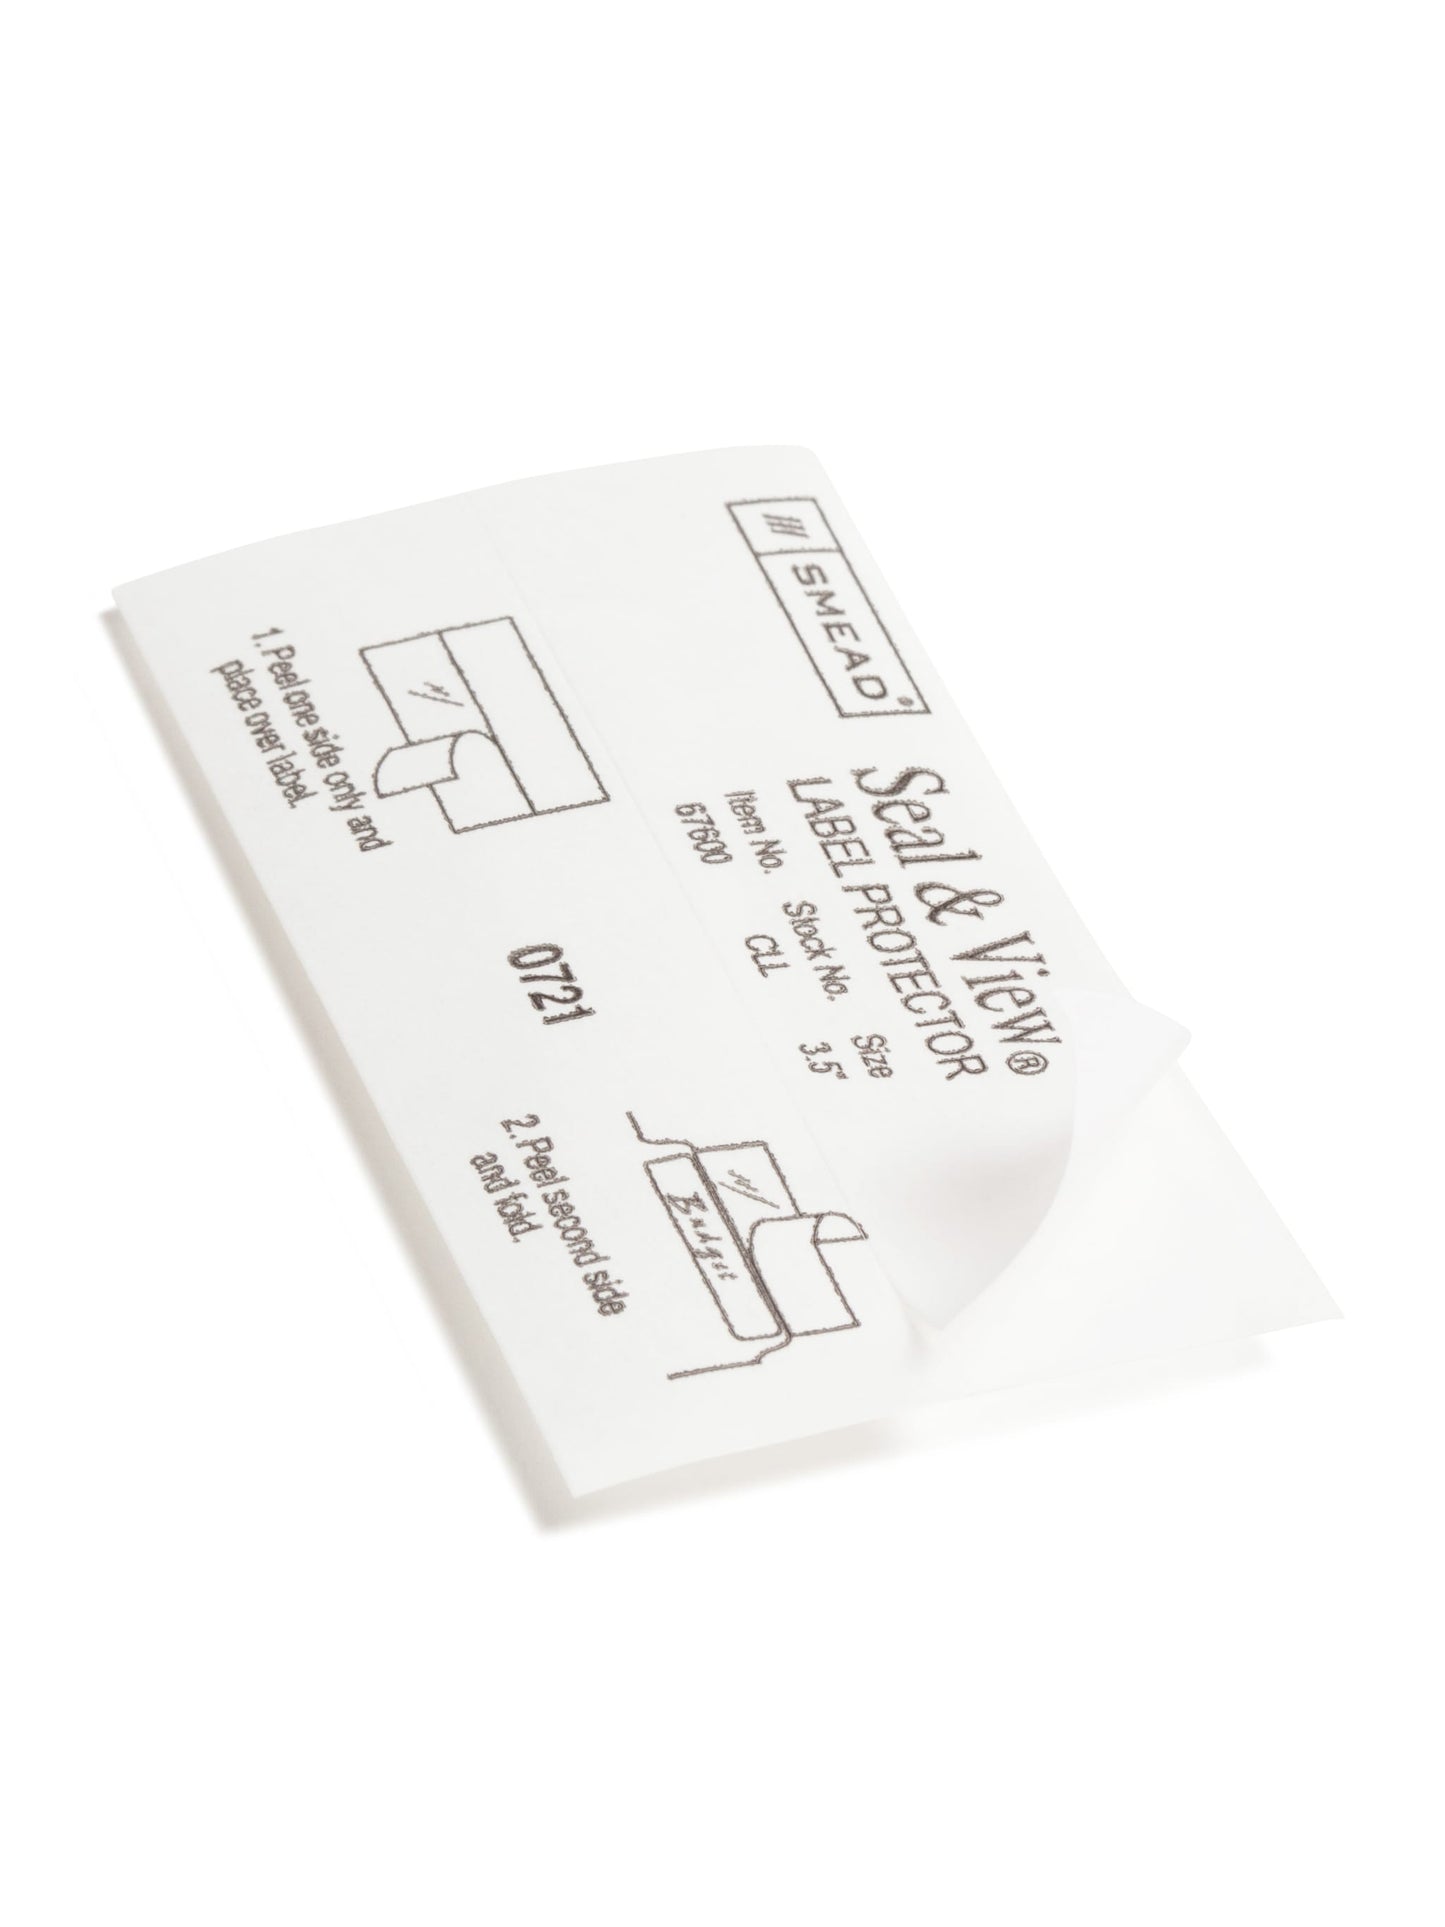 Seal and View® Clear Label Protectors, Clear Color, 3-1/2" X 1-11/16" Size, Set of 1, 086486676007